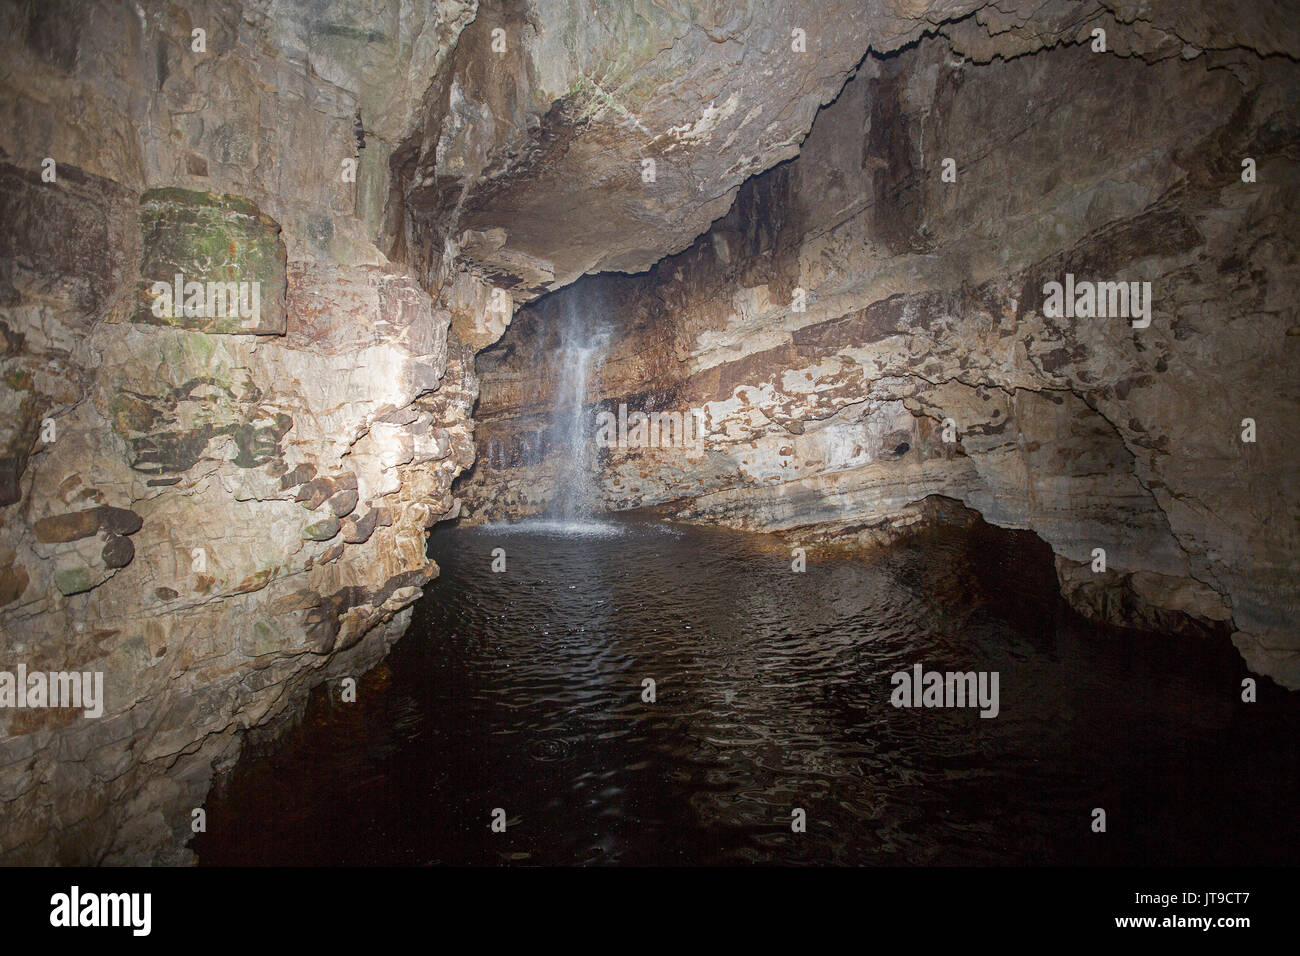 Waterfall and subterranean river in Smoo caves, Durness, Scotland Stock Photo